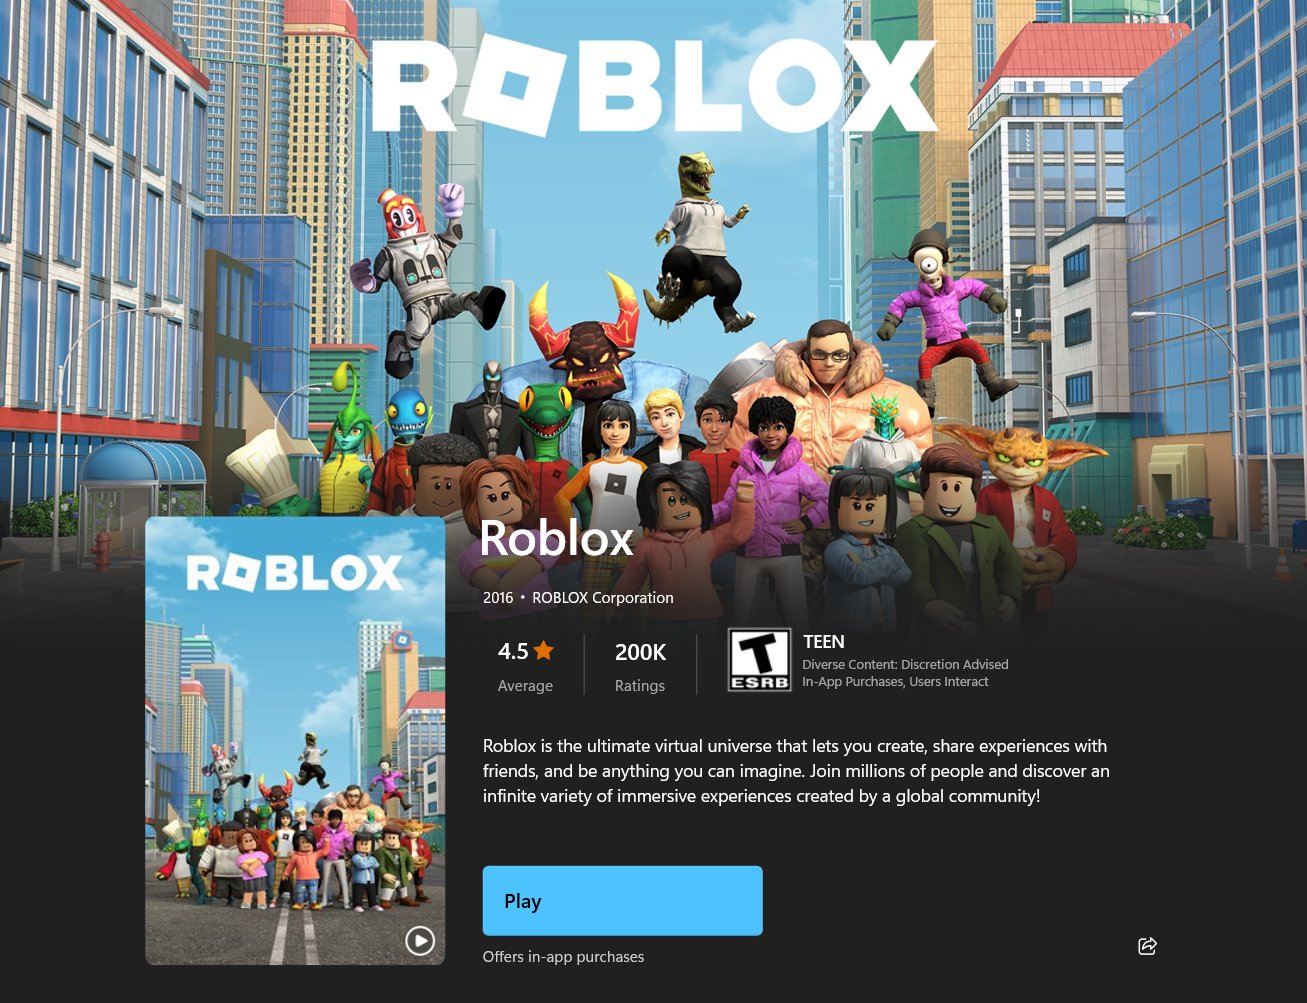 ROBLOX Wallpapers on the App Store